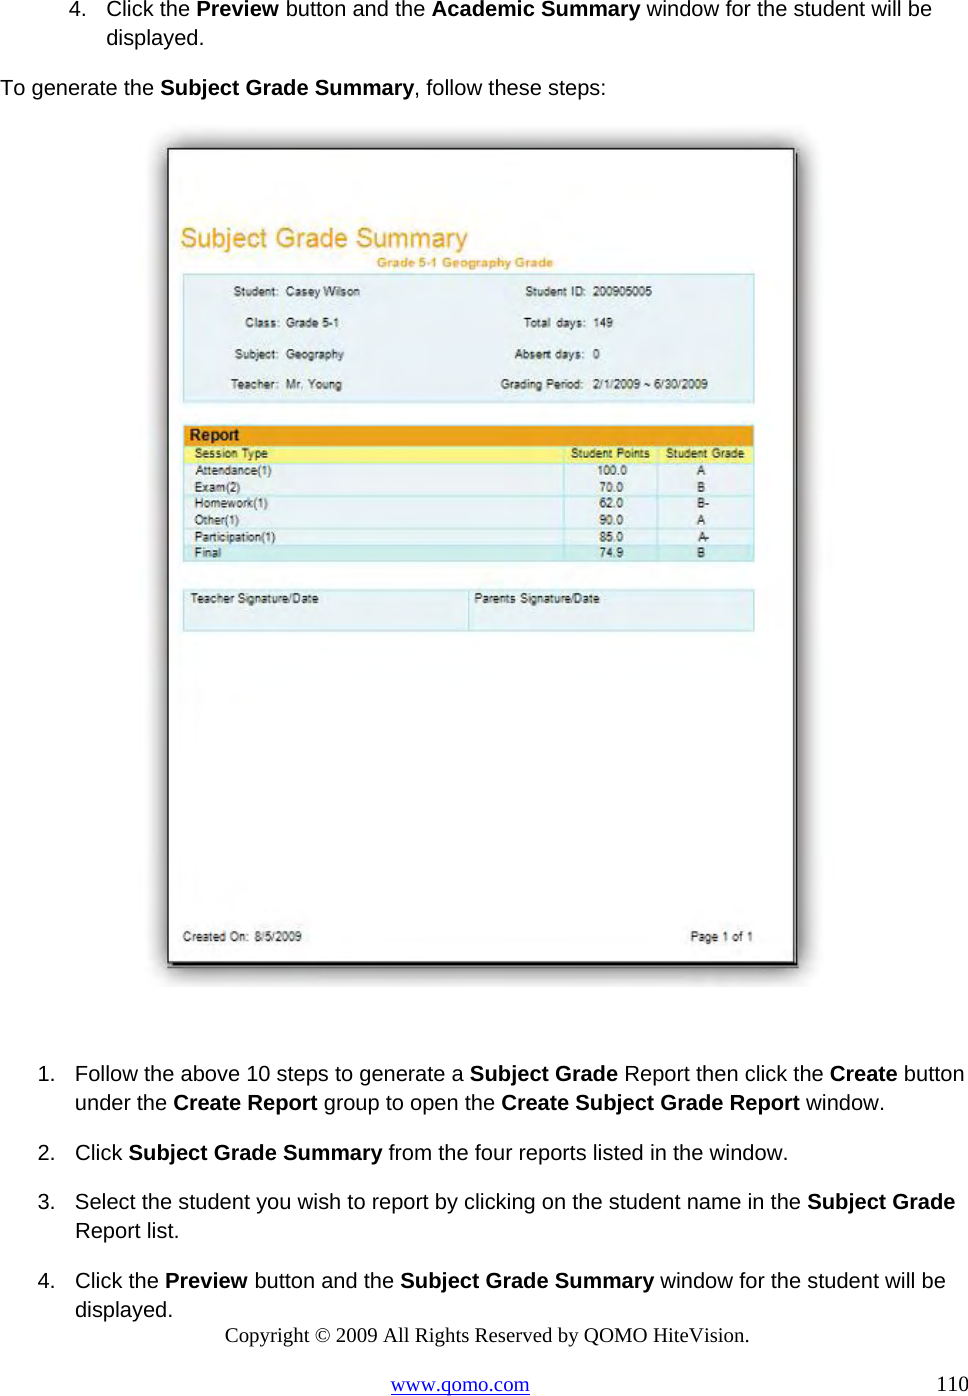 Copyright © 2009 All Rights Reserved by QOMO HiteVision. www.qomo.com                                                                          110  4. Click the Preview button and the Academic Summary window for the student will be displayed. To generate the Subject Grade Summary, follow these steps:   1.  Follow the above 10 steps to generate a Subject Grade Report then click the Create button under the Create Report group to open the Create Subject Grade Report window. 2. Click Subject Grade Summary from the four reports listed in the window. 3.  Select the student you wish to report by clicking on the student name in the Subject Grade Report list. 4. Click the Preview button and the Subject Grade Summary window for the student will be displayed. 